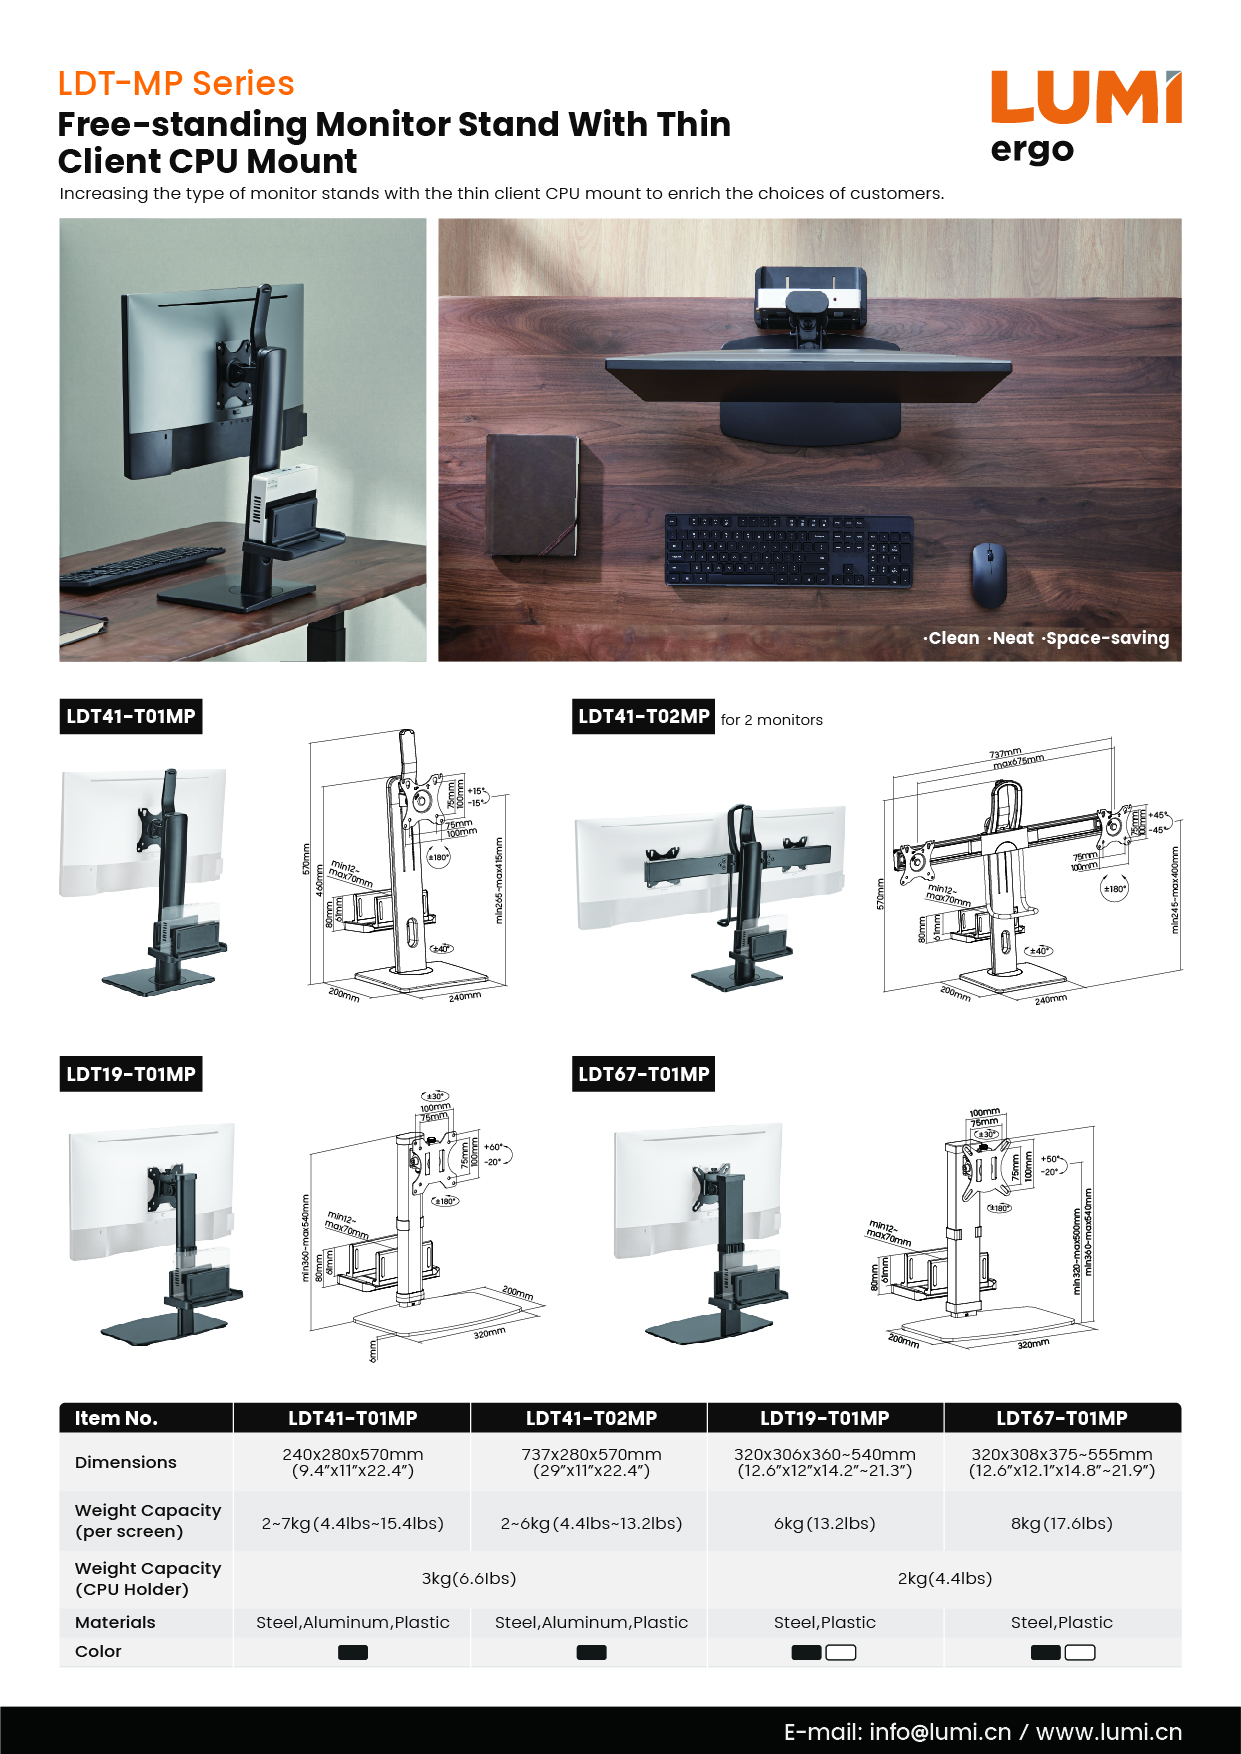 LDT-MP Series Free-standing Monitor Stands With Thin  Client CPU Mounts